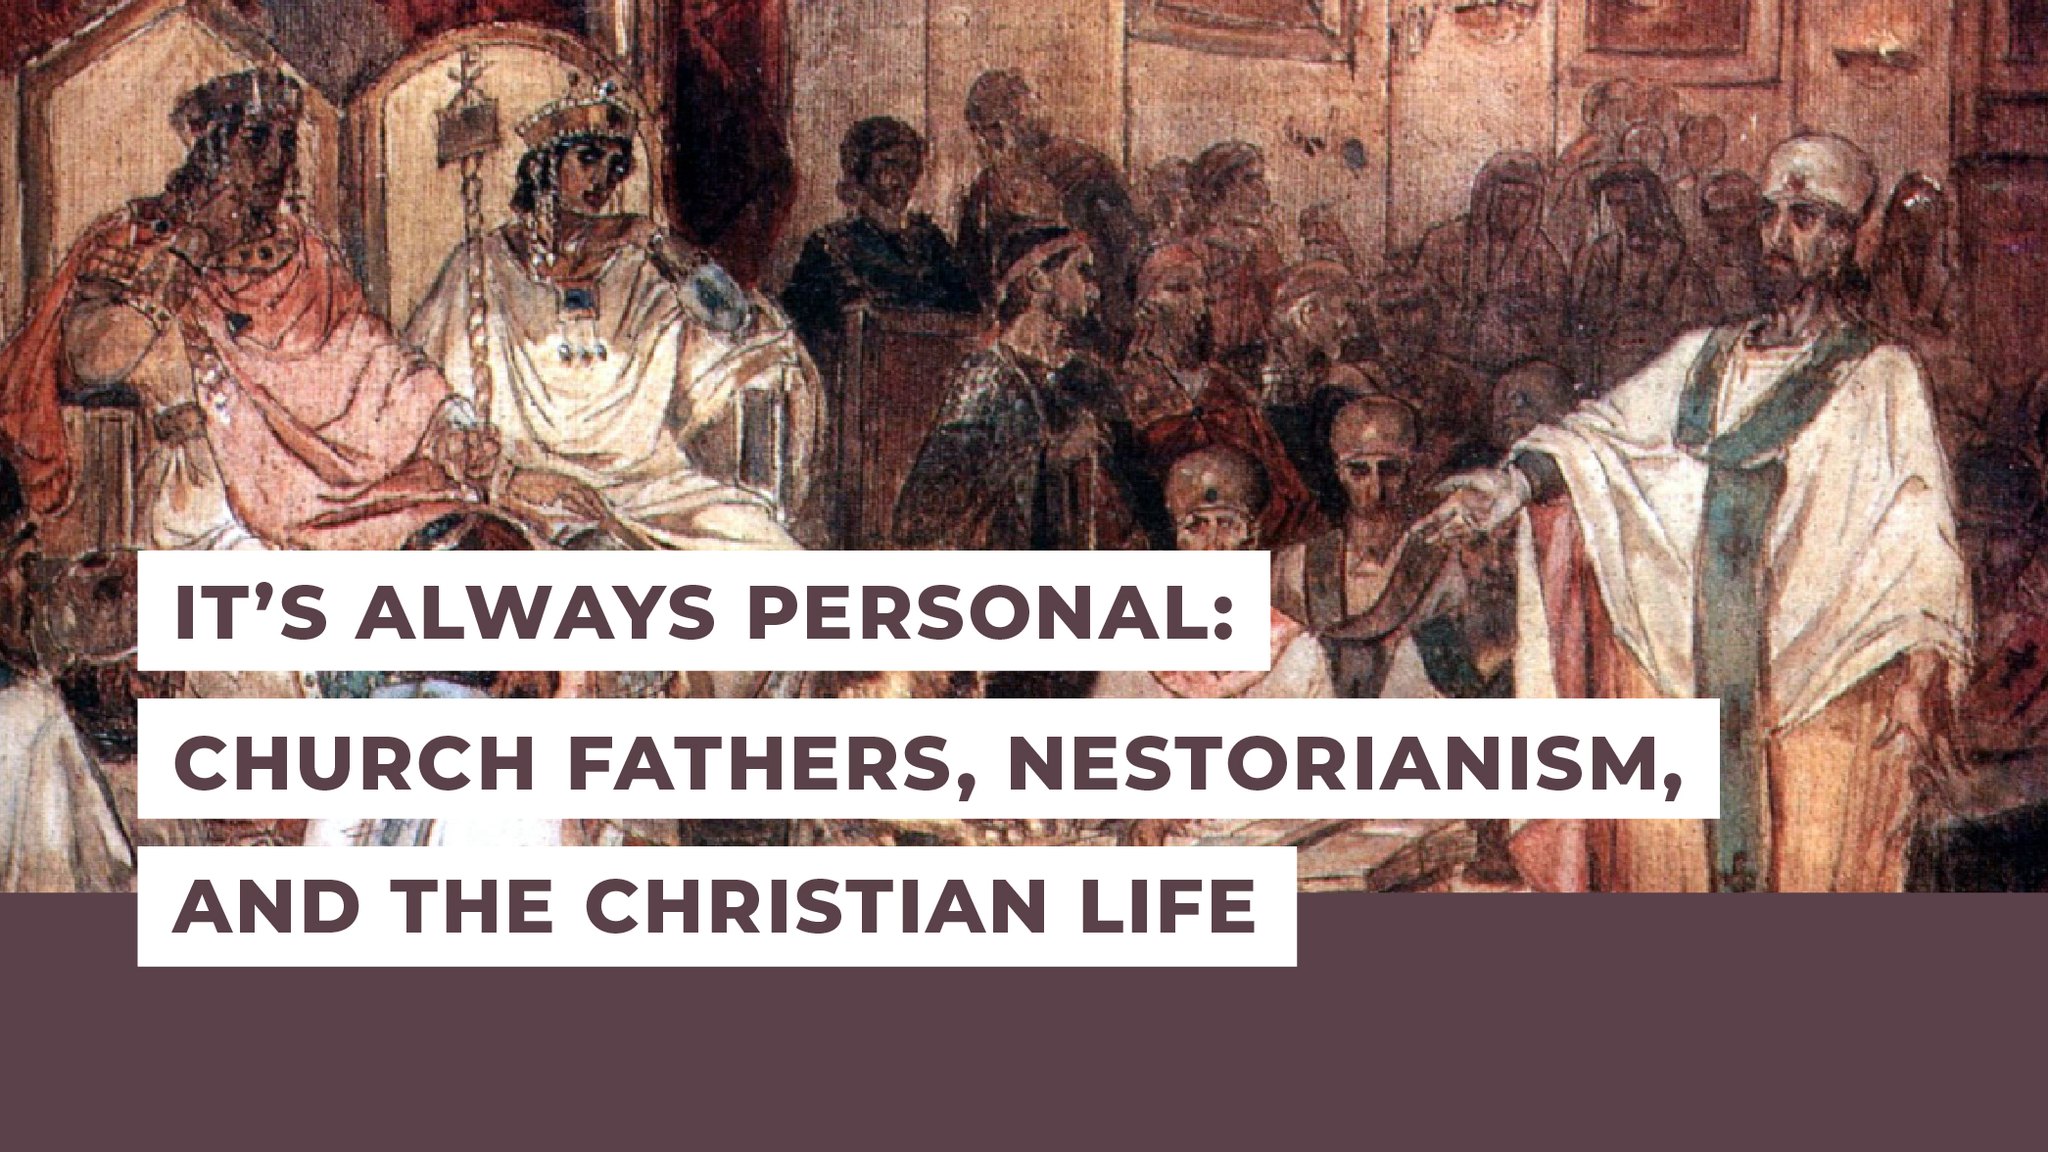 It’s Always Personal: Church Fathers, Nestorianism, and the Christian Life